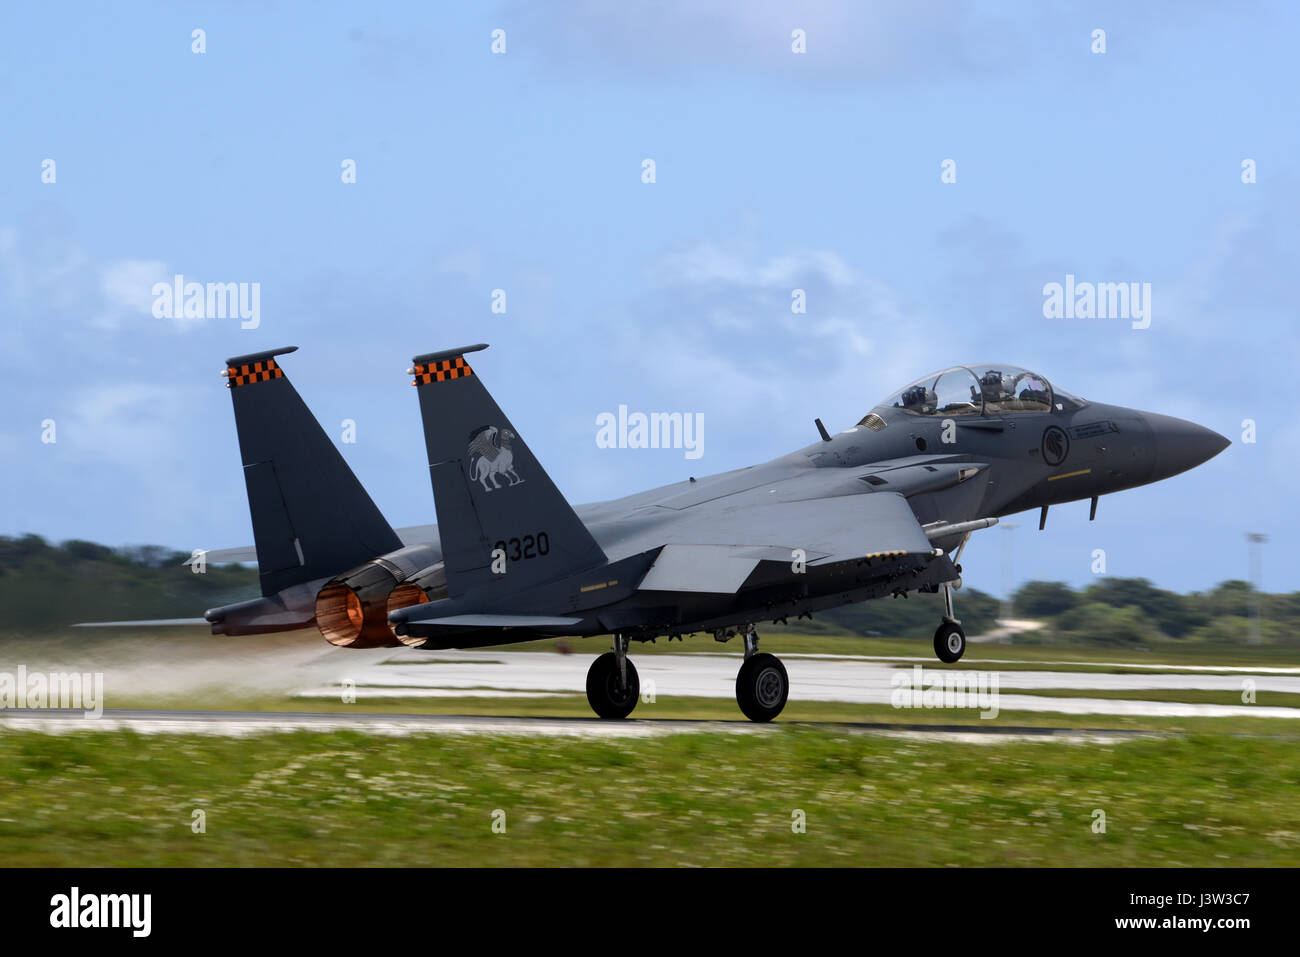 A Republic of Singapore Air Force F-15SG takes-off April 20, 2017, at Andersen Air Force Base, Guam. The RSAF deployed to Andersen AFB in support of Exercise Vigilant Ace to conduct bilateral training for aircrew and maintenance personnel to sharpen their skills and strengthen ties with partners in the Pacific. (U.S. Air Force/Airman 1st Class Gerald R. Willis) Stock Photo